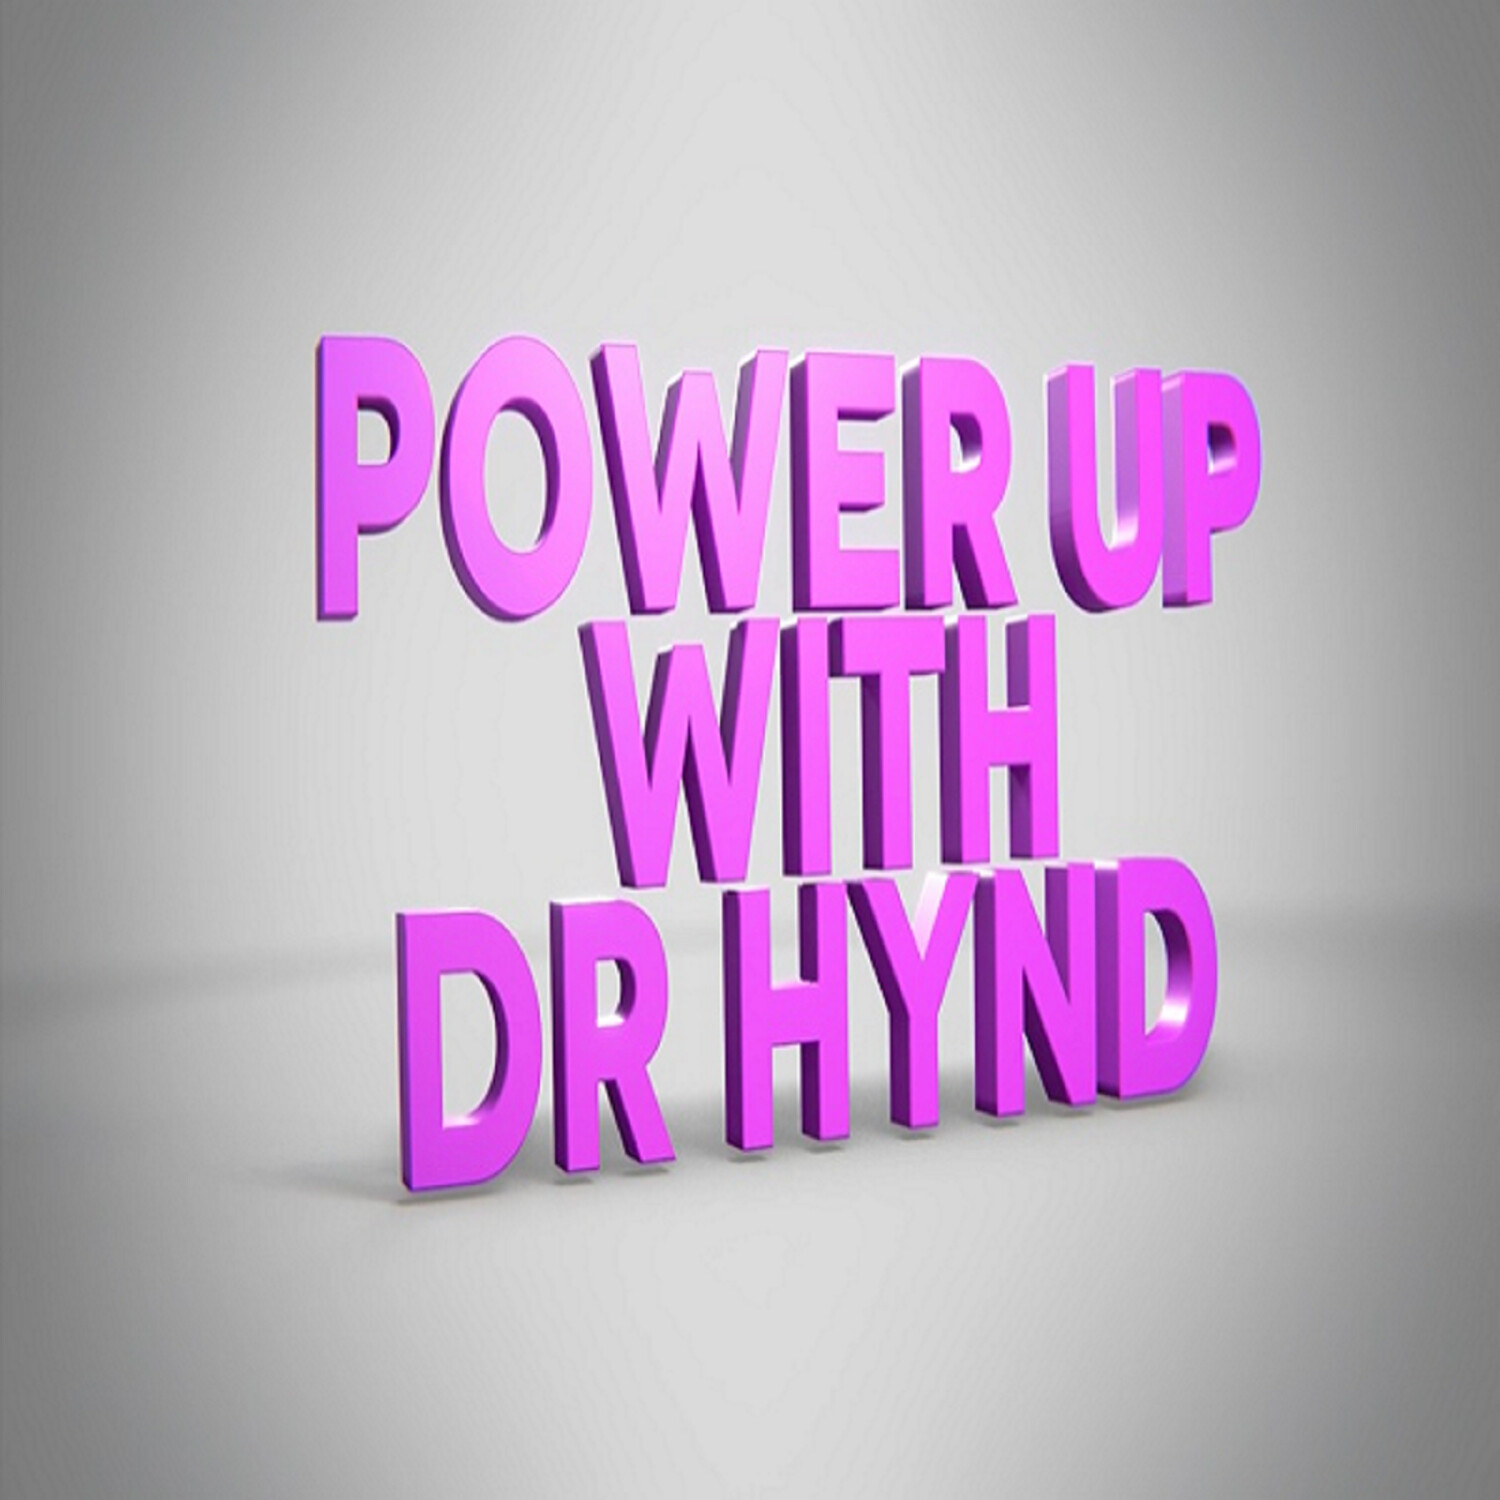 Women's Empowerment Series with Dr. Hynd and Sabrina Victoria from Florida